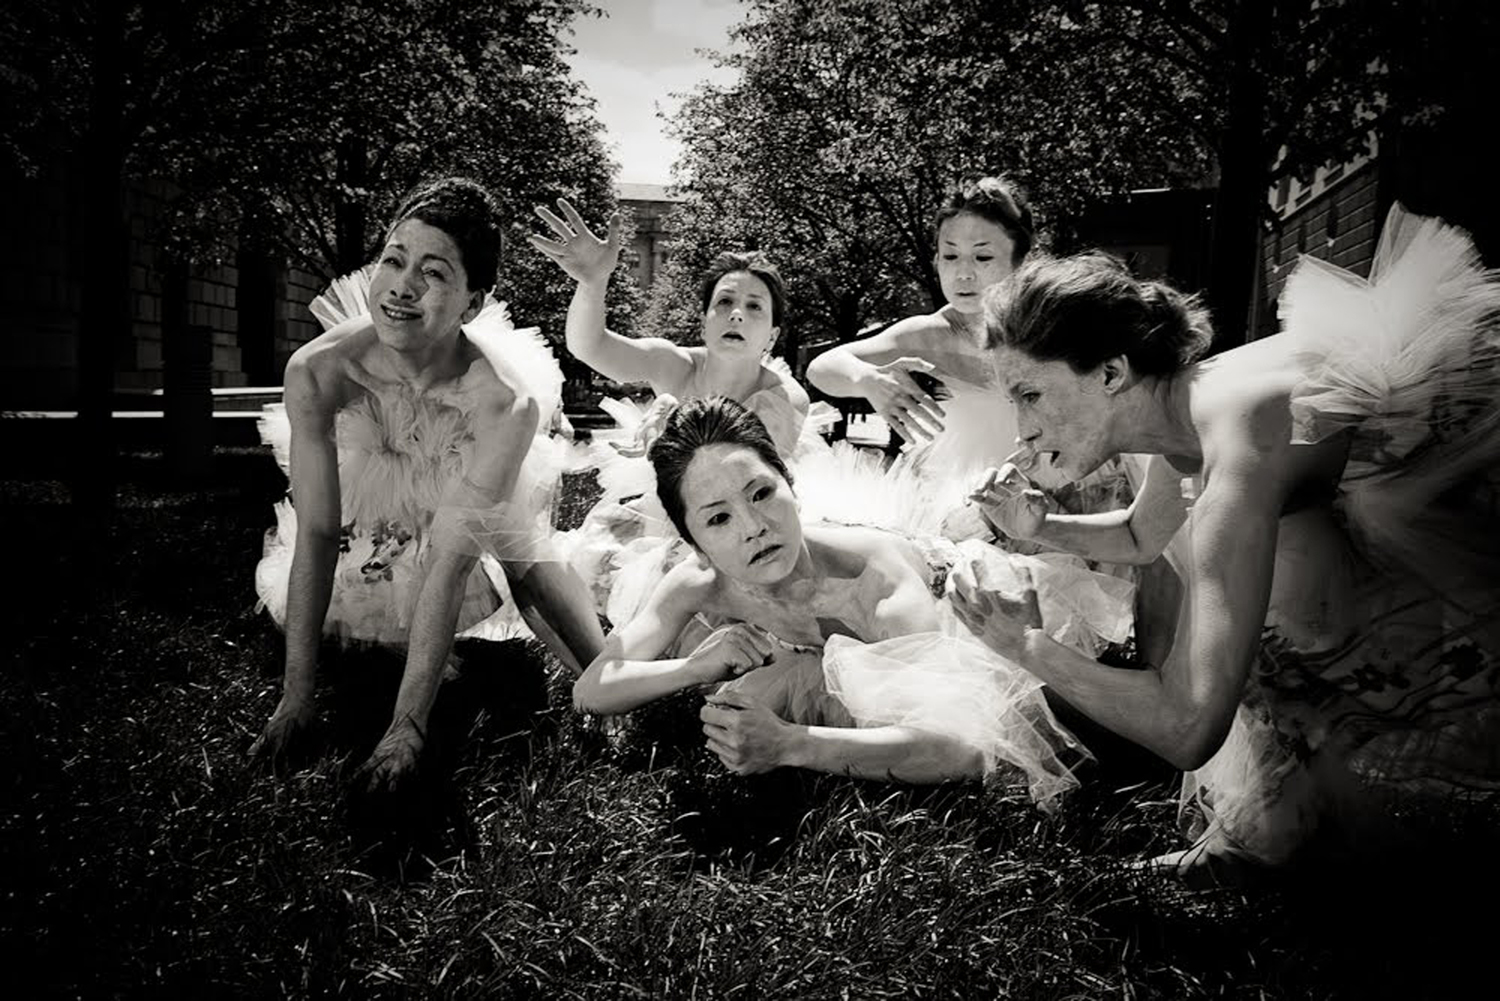 Butoh company Vangeline Theater in Washington DC. Photo by Yassine